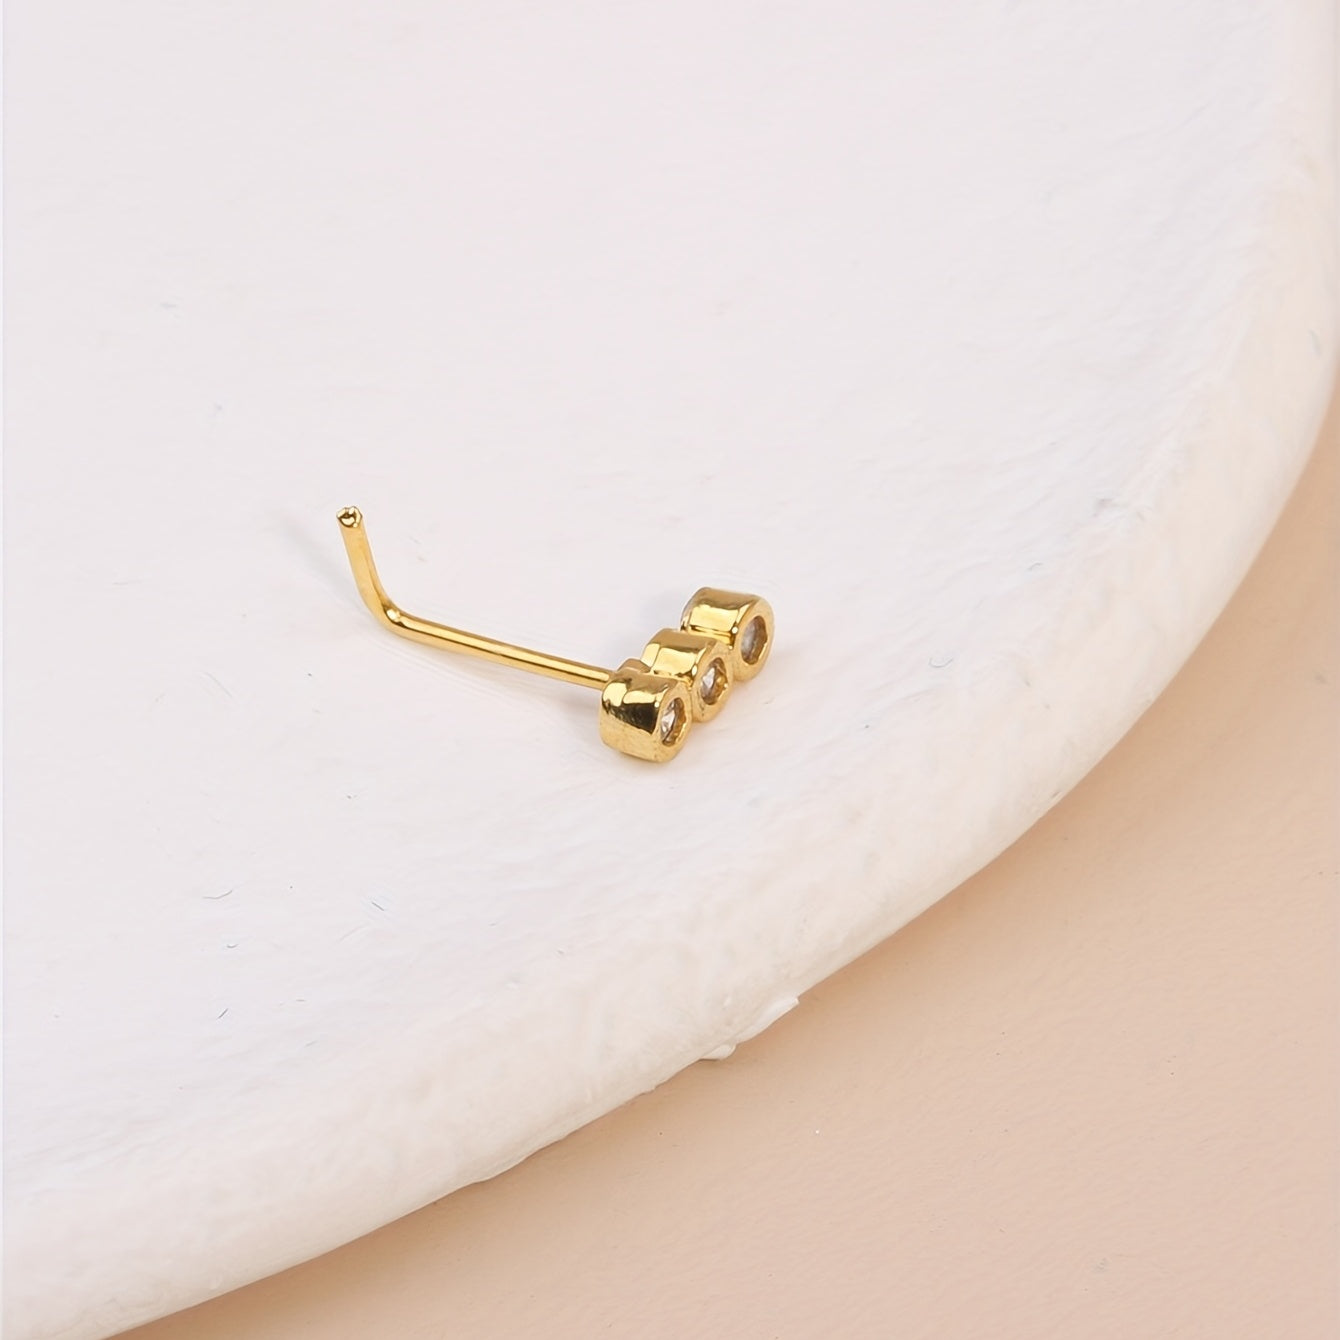 1Pcs Golden L Shape Nose Ring Stud For Women Men CZ Body Piercing Jewelry Holiday Gifts